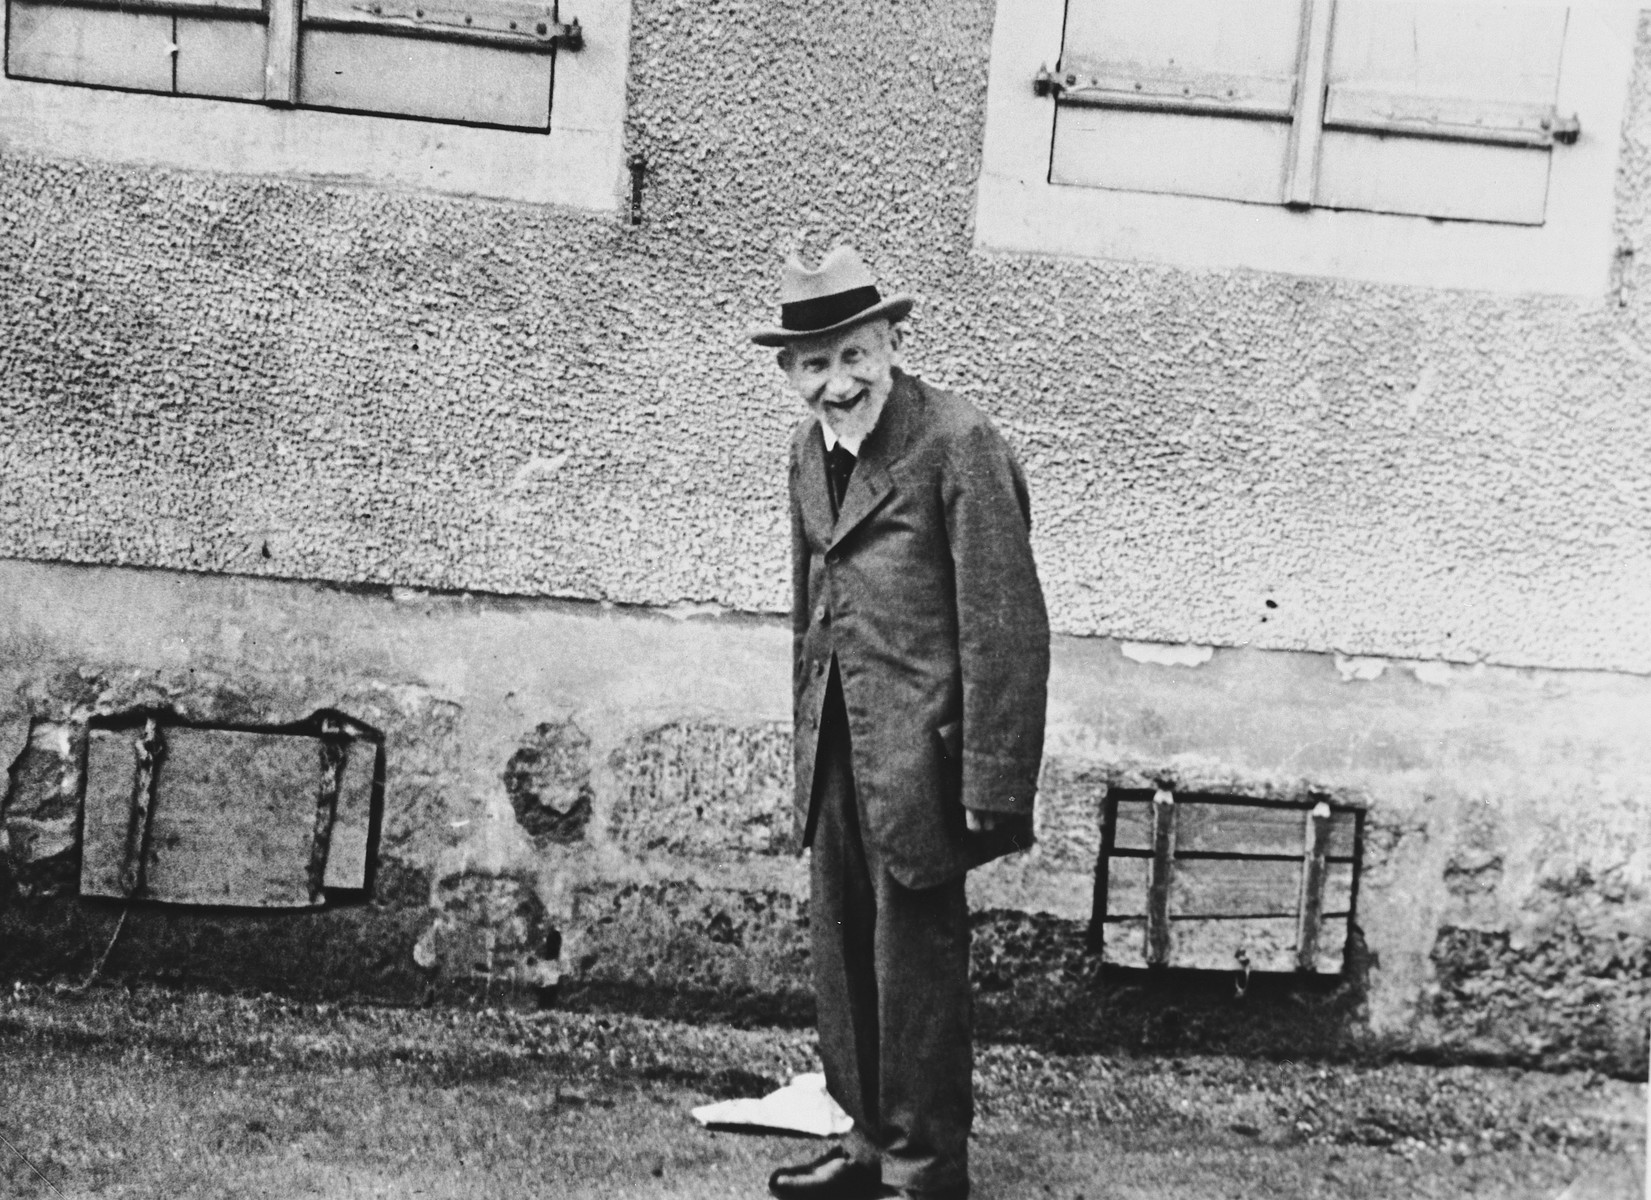 An elderly Jewish man poses on a sidewalk in Breisach, Germany on his way to the synagogue.

Pictured is Leopold Geismar.  He was born in Breisach on January 10, 1843 and died in Gailingen on November 10, 1938.

This is part of series of photographs taken of the Breisach Jewish community 1937.  In October 1940 the entire community was deported to the Gurs internment camp in southern France.